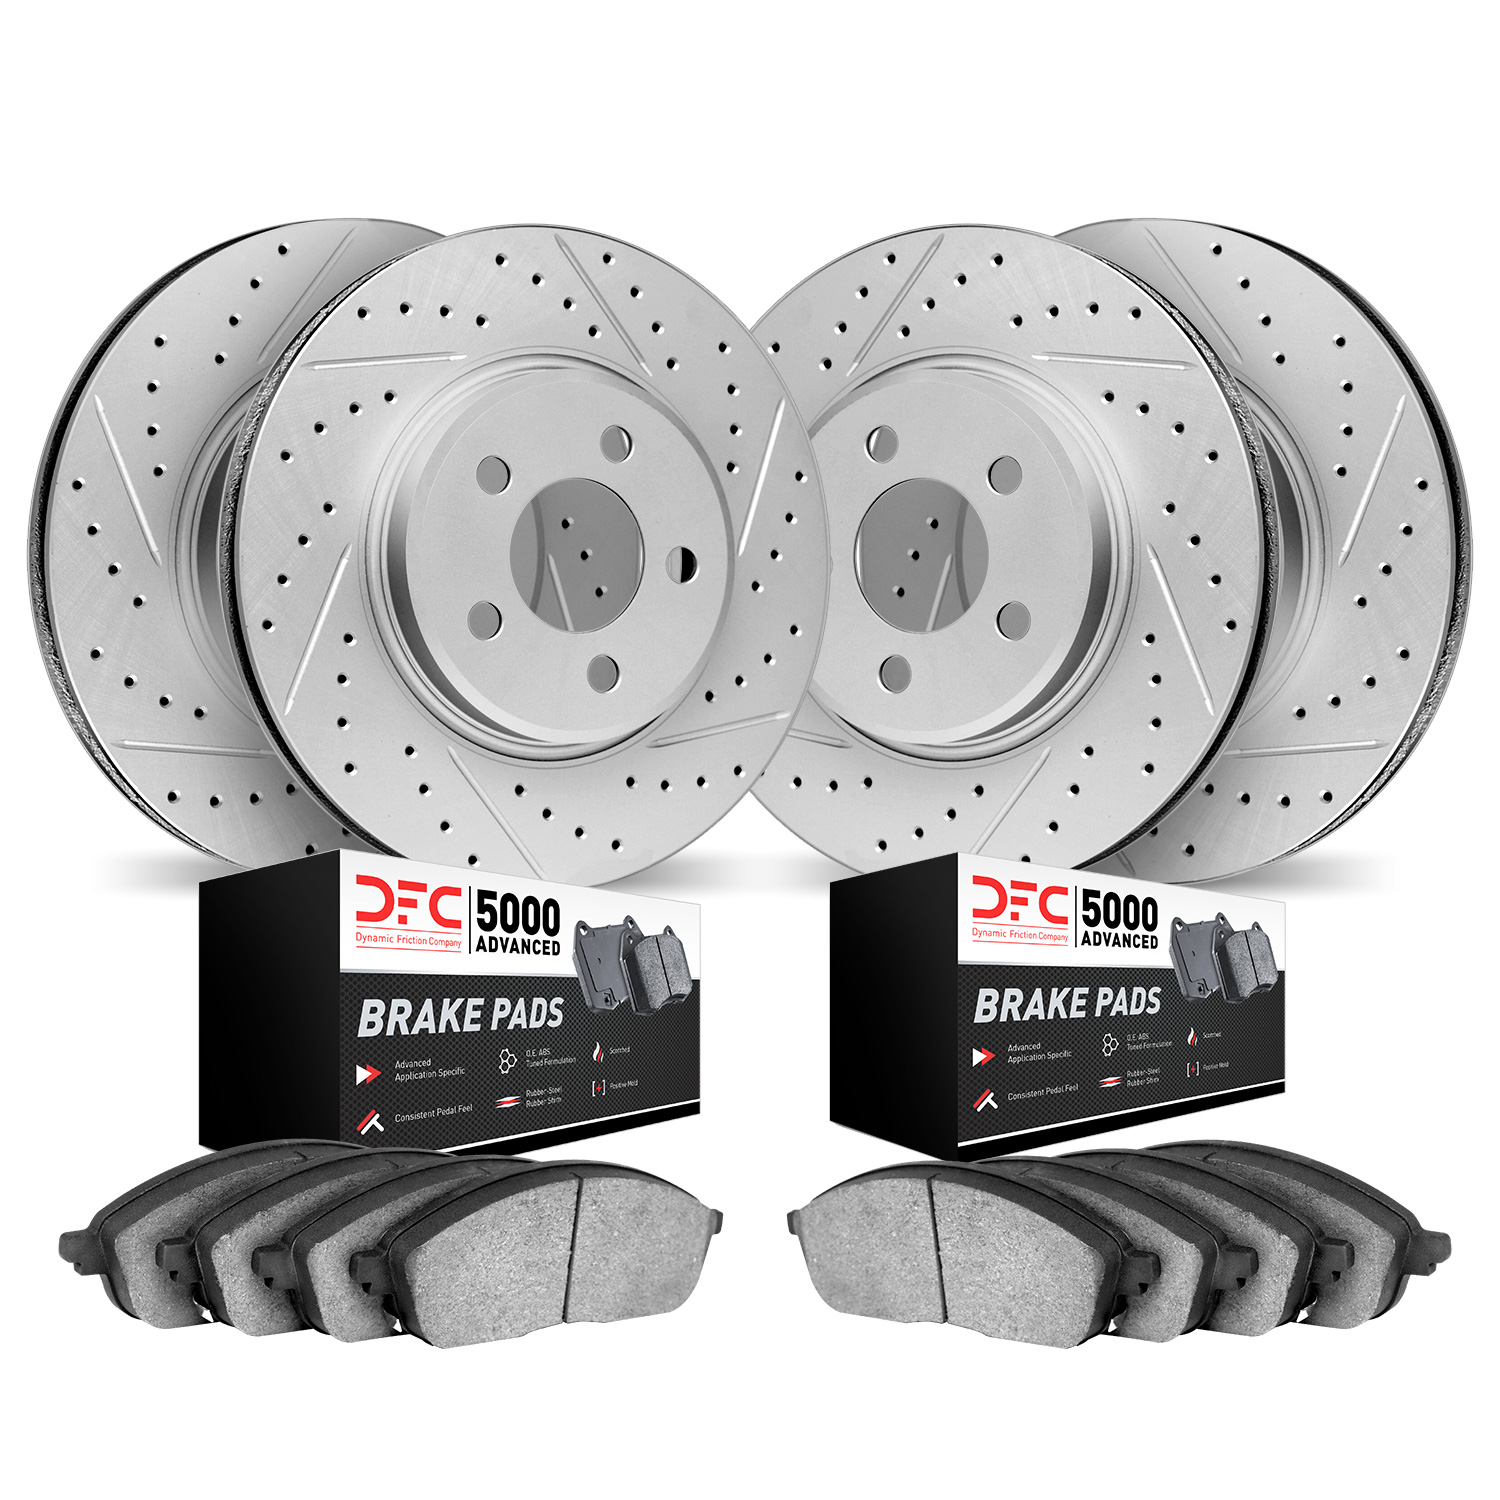 2504-65005 Geoperformance Drilled/Slotted Rotors w/5000 Advanced Brake Pads Kit, 2003-2003 GM, Position: Front and Rear